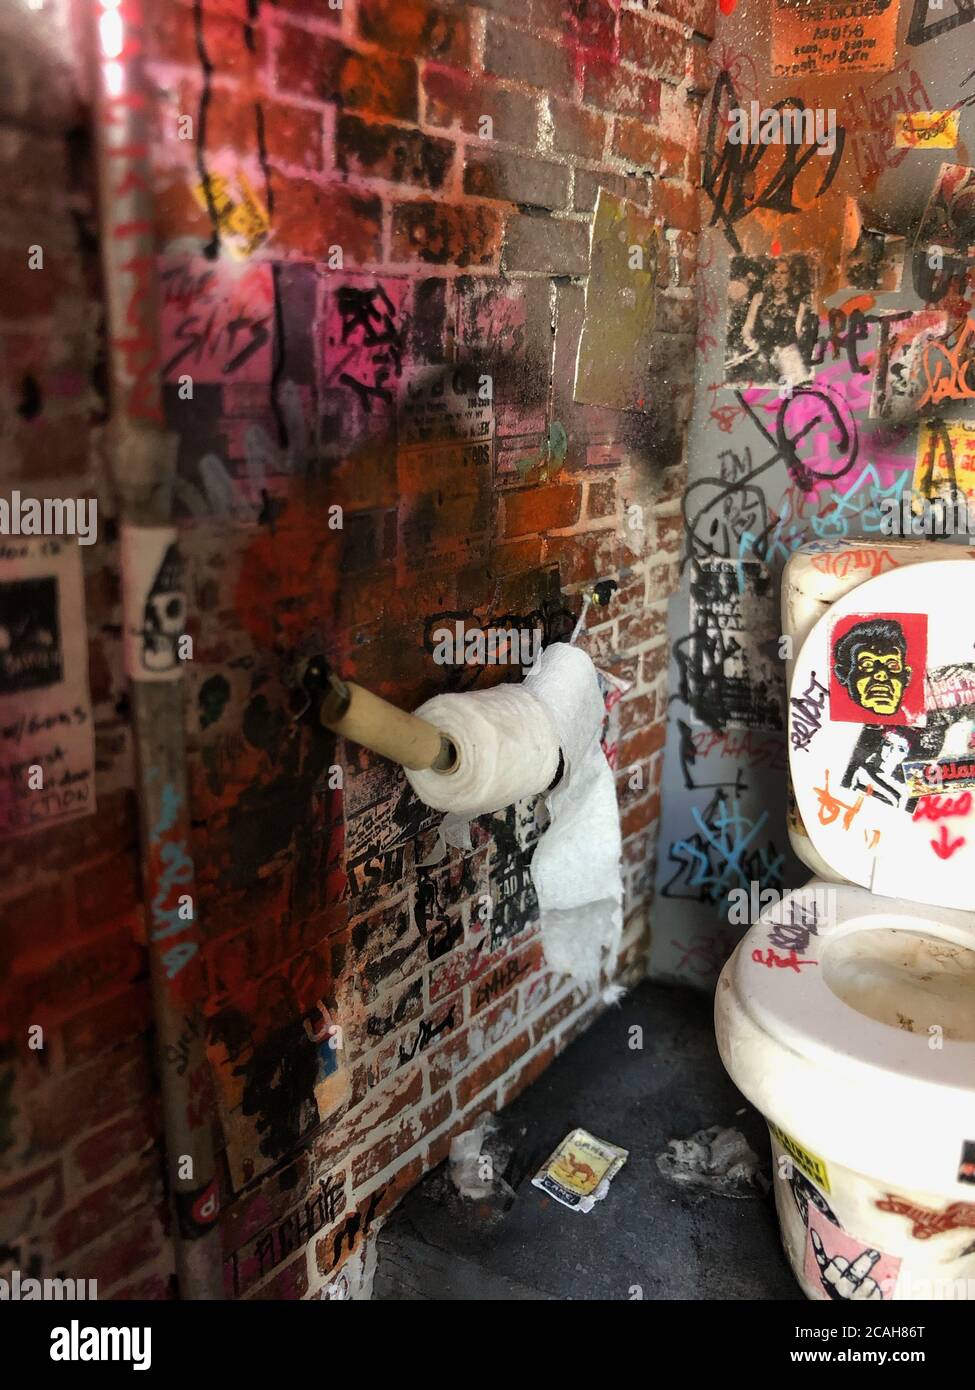 Tiny toilets Old punks missing the glory days of New York's CBGBs mecca can now revisit the fabled venue's infamous loos in a palm-size new art piece.   The toilets, where stars like the Ramones and Blondie hung out with punk posers have been recreated as miniatures by a quirky New York artist.   Danielle McGurran's keen eye and artistic talents have crafted such incredible replicas you can imagine tiny terrors living it up as the Big Apple's punk scene pogos around them.   The CBGBs crapper has become mythical over the years, with so many stars snarling for photos there.   The 47-year-old min Stock Photo